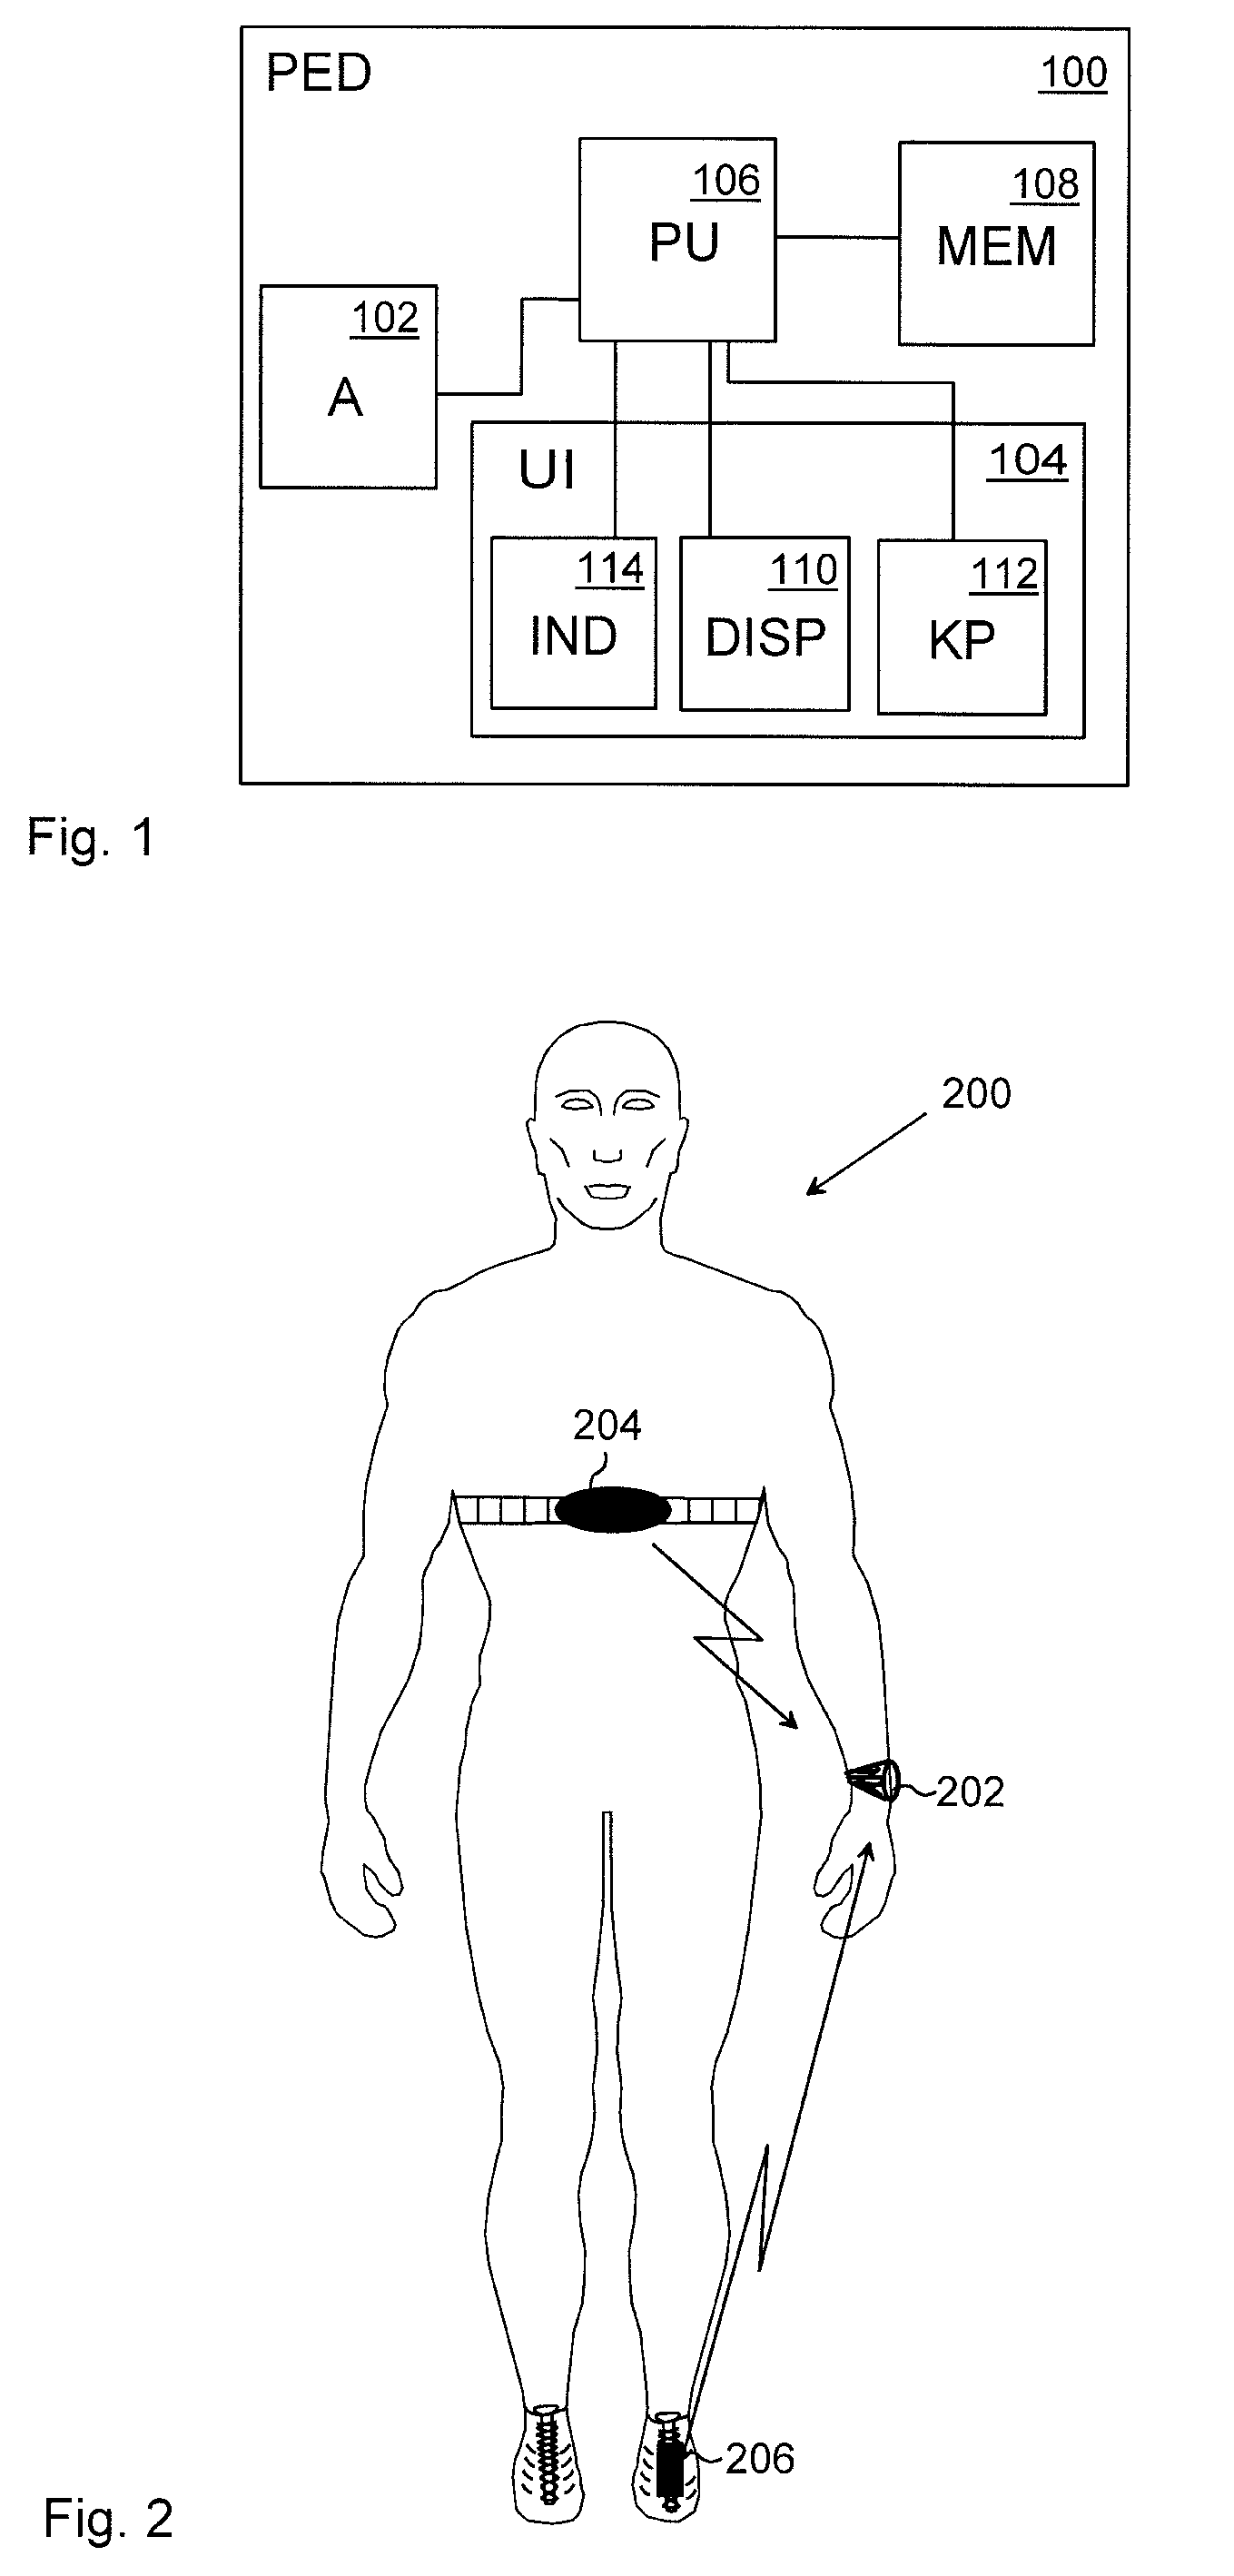 Portable electronic device, method, and computer-readable medium for determining user's activity level